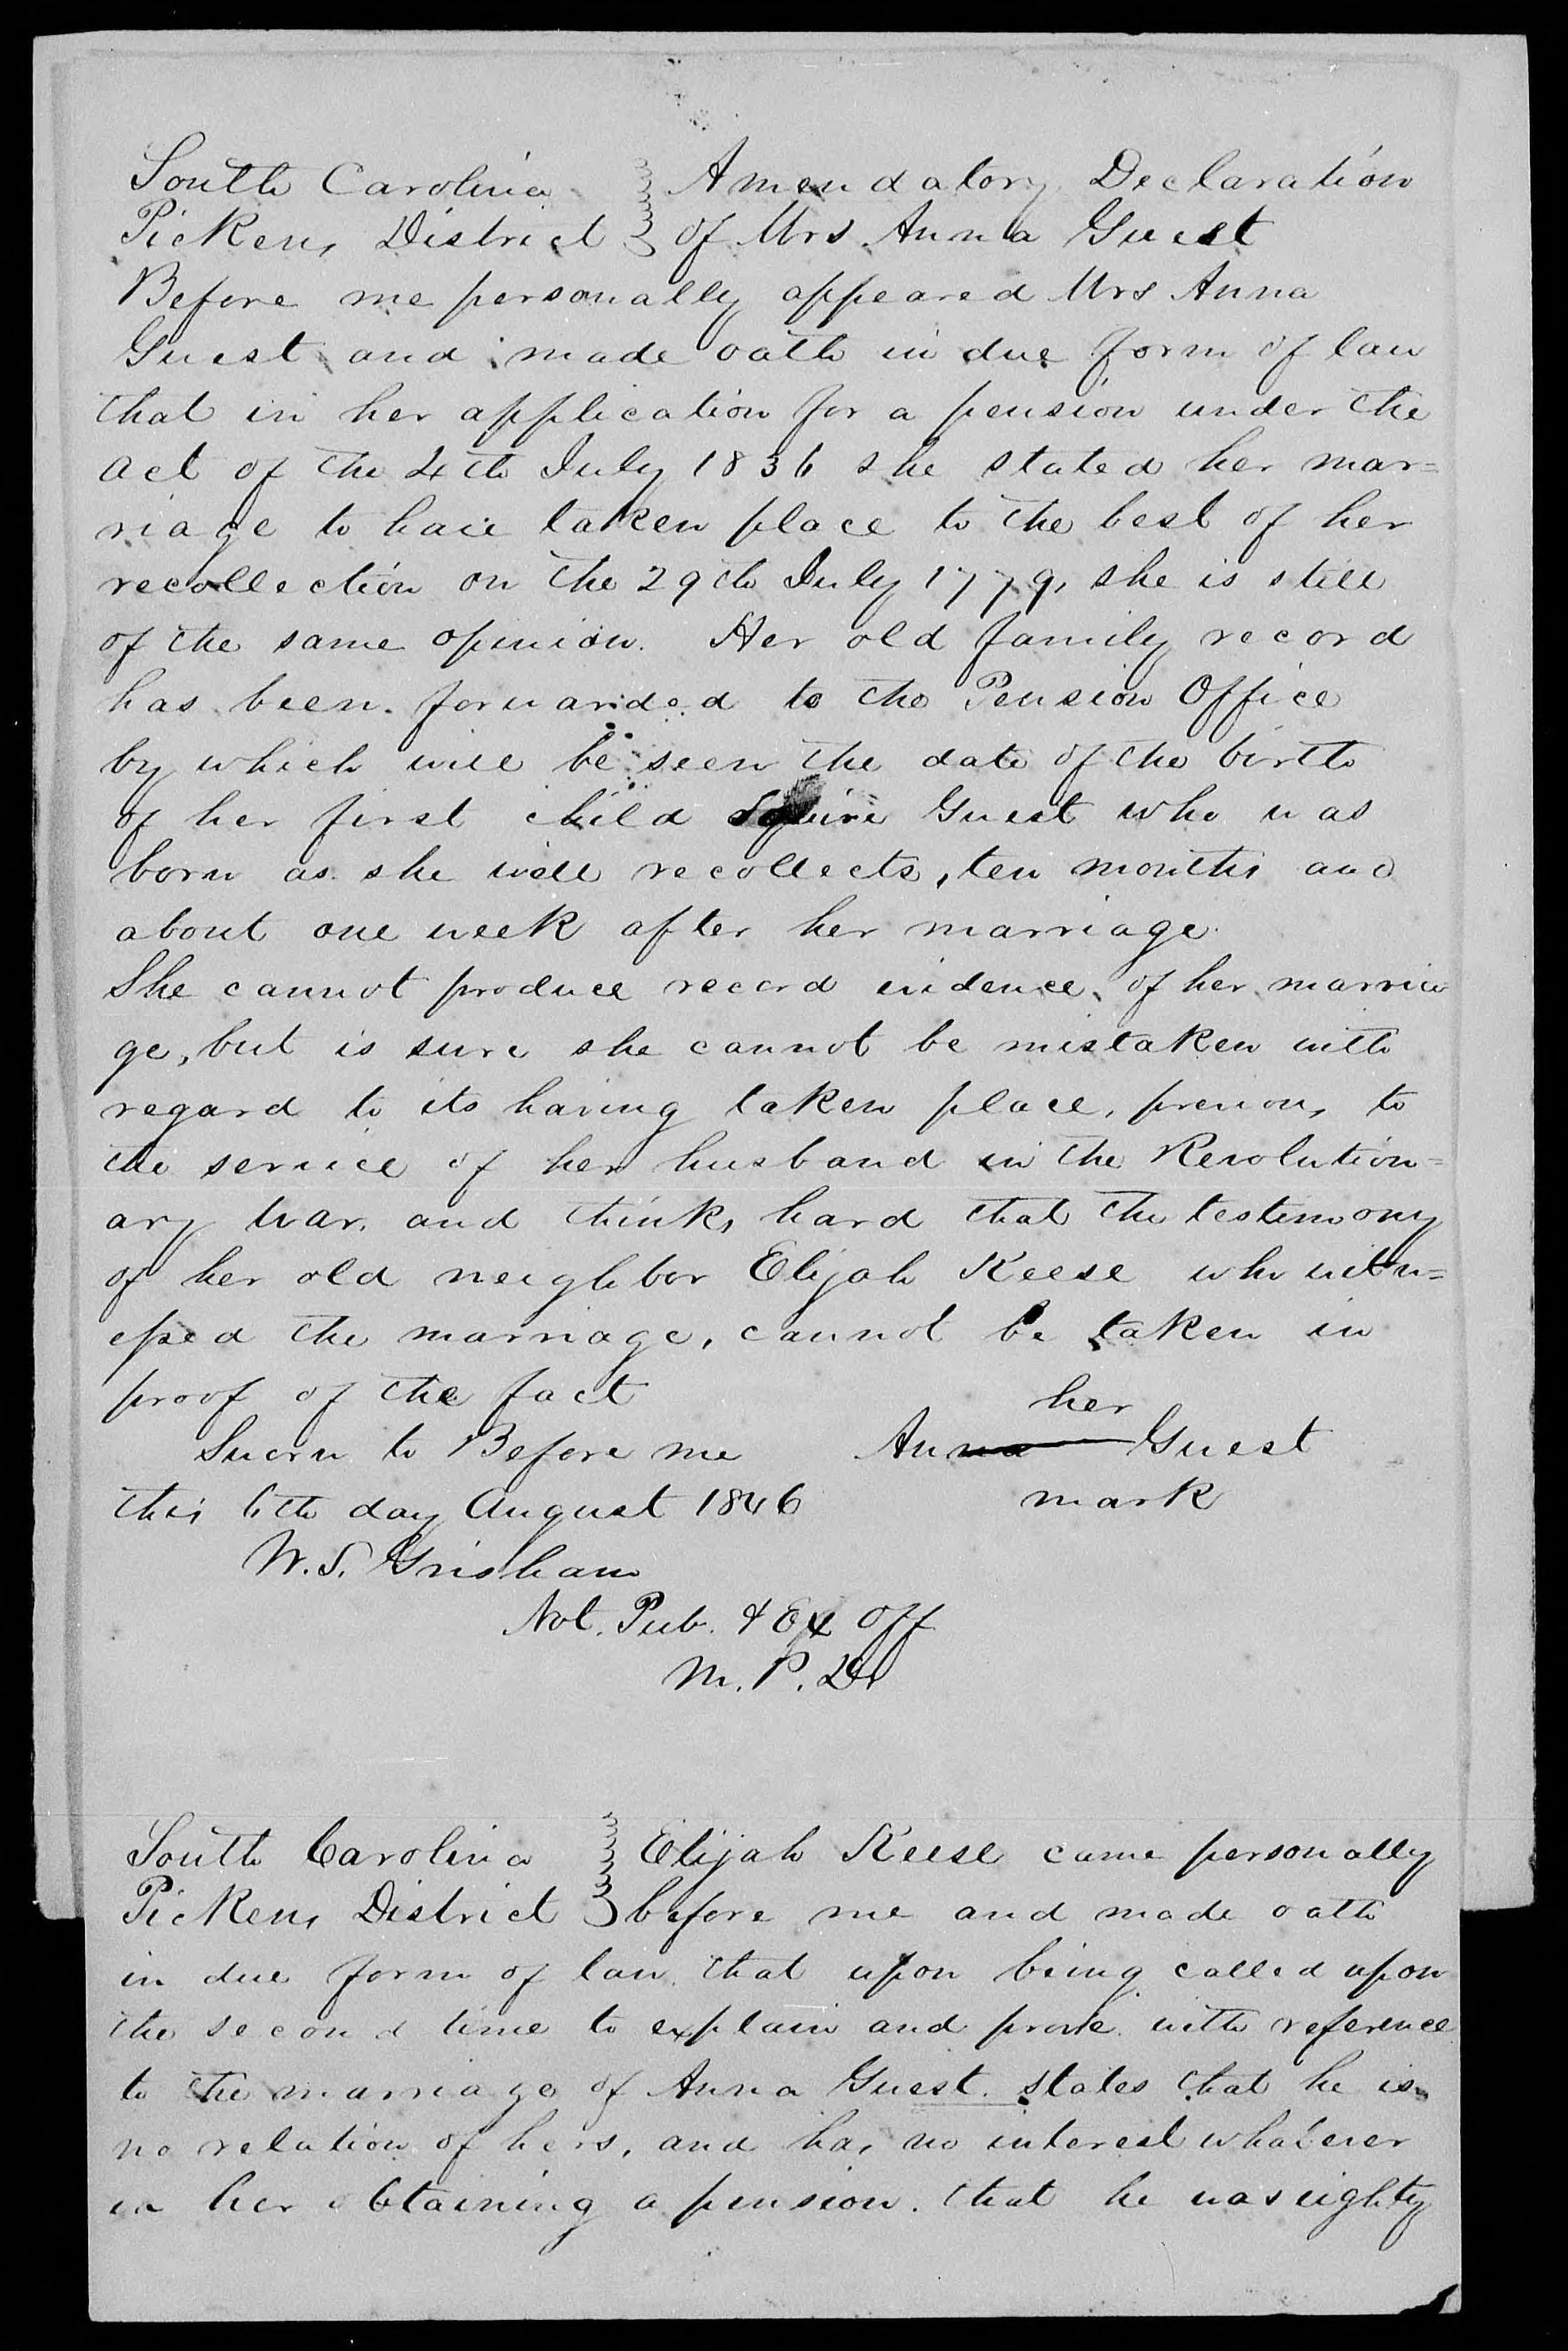 Application for a Veteran's Pension from William Guest, 10 March 1834, page 1